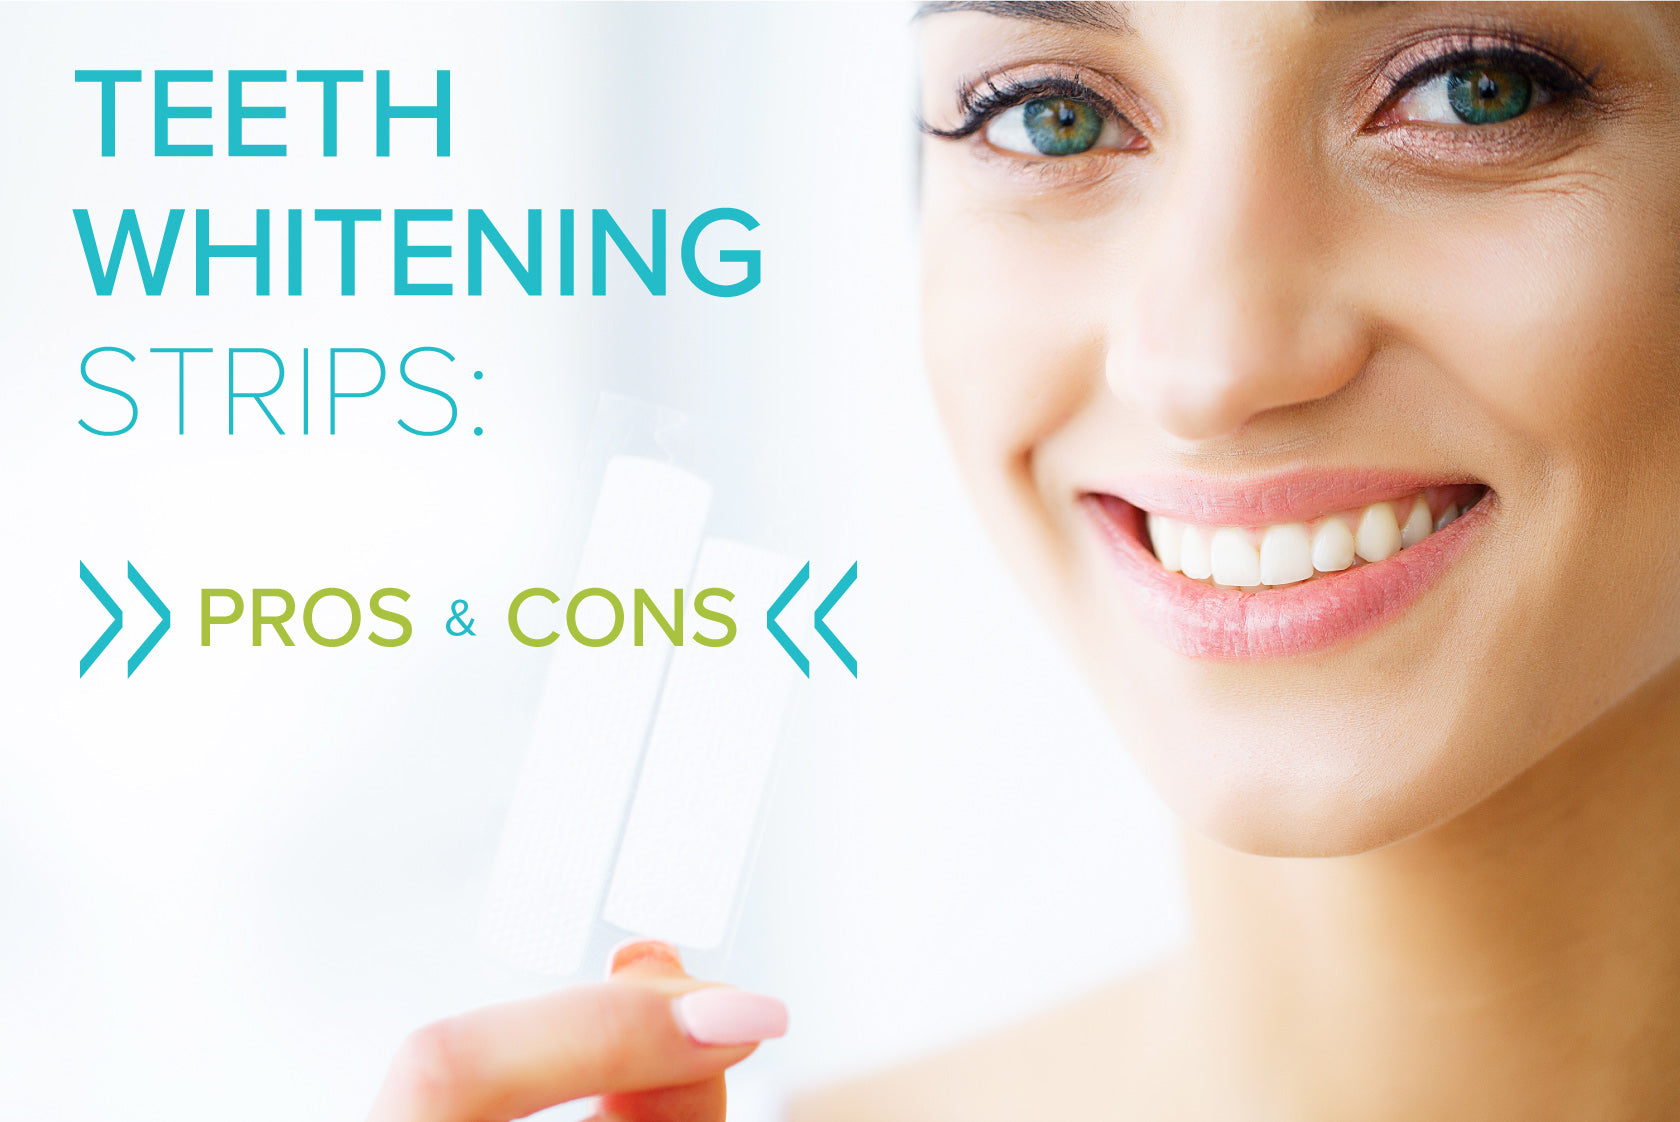 Oxyfresh - Teeth Whitening Strips Pros and Cons